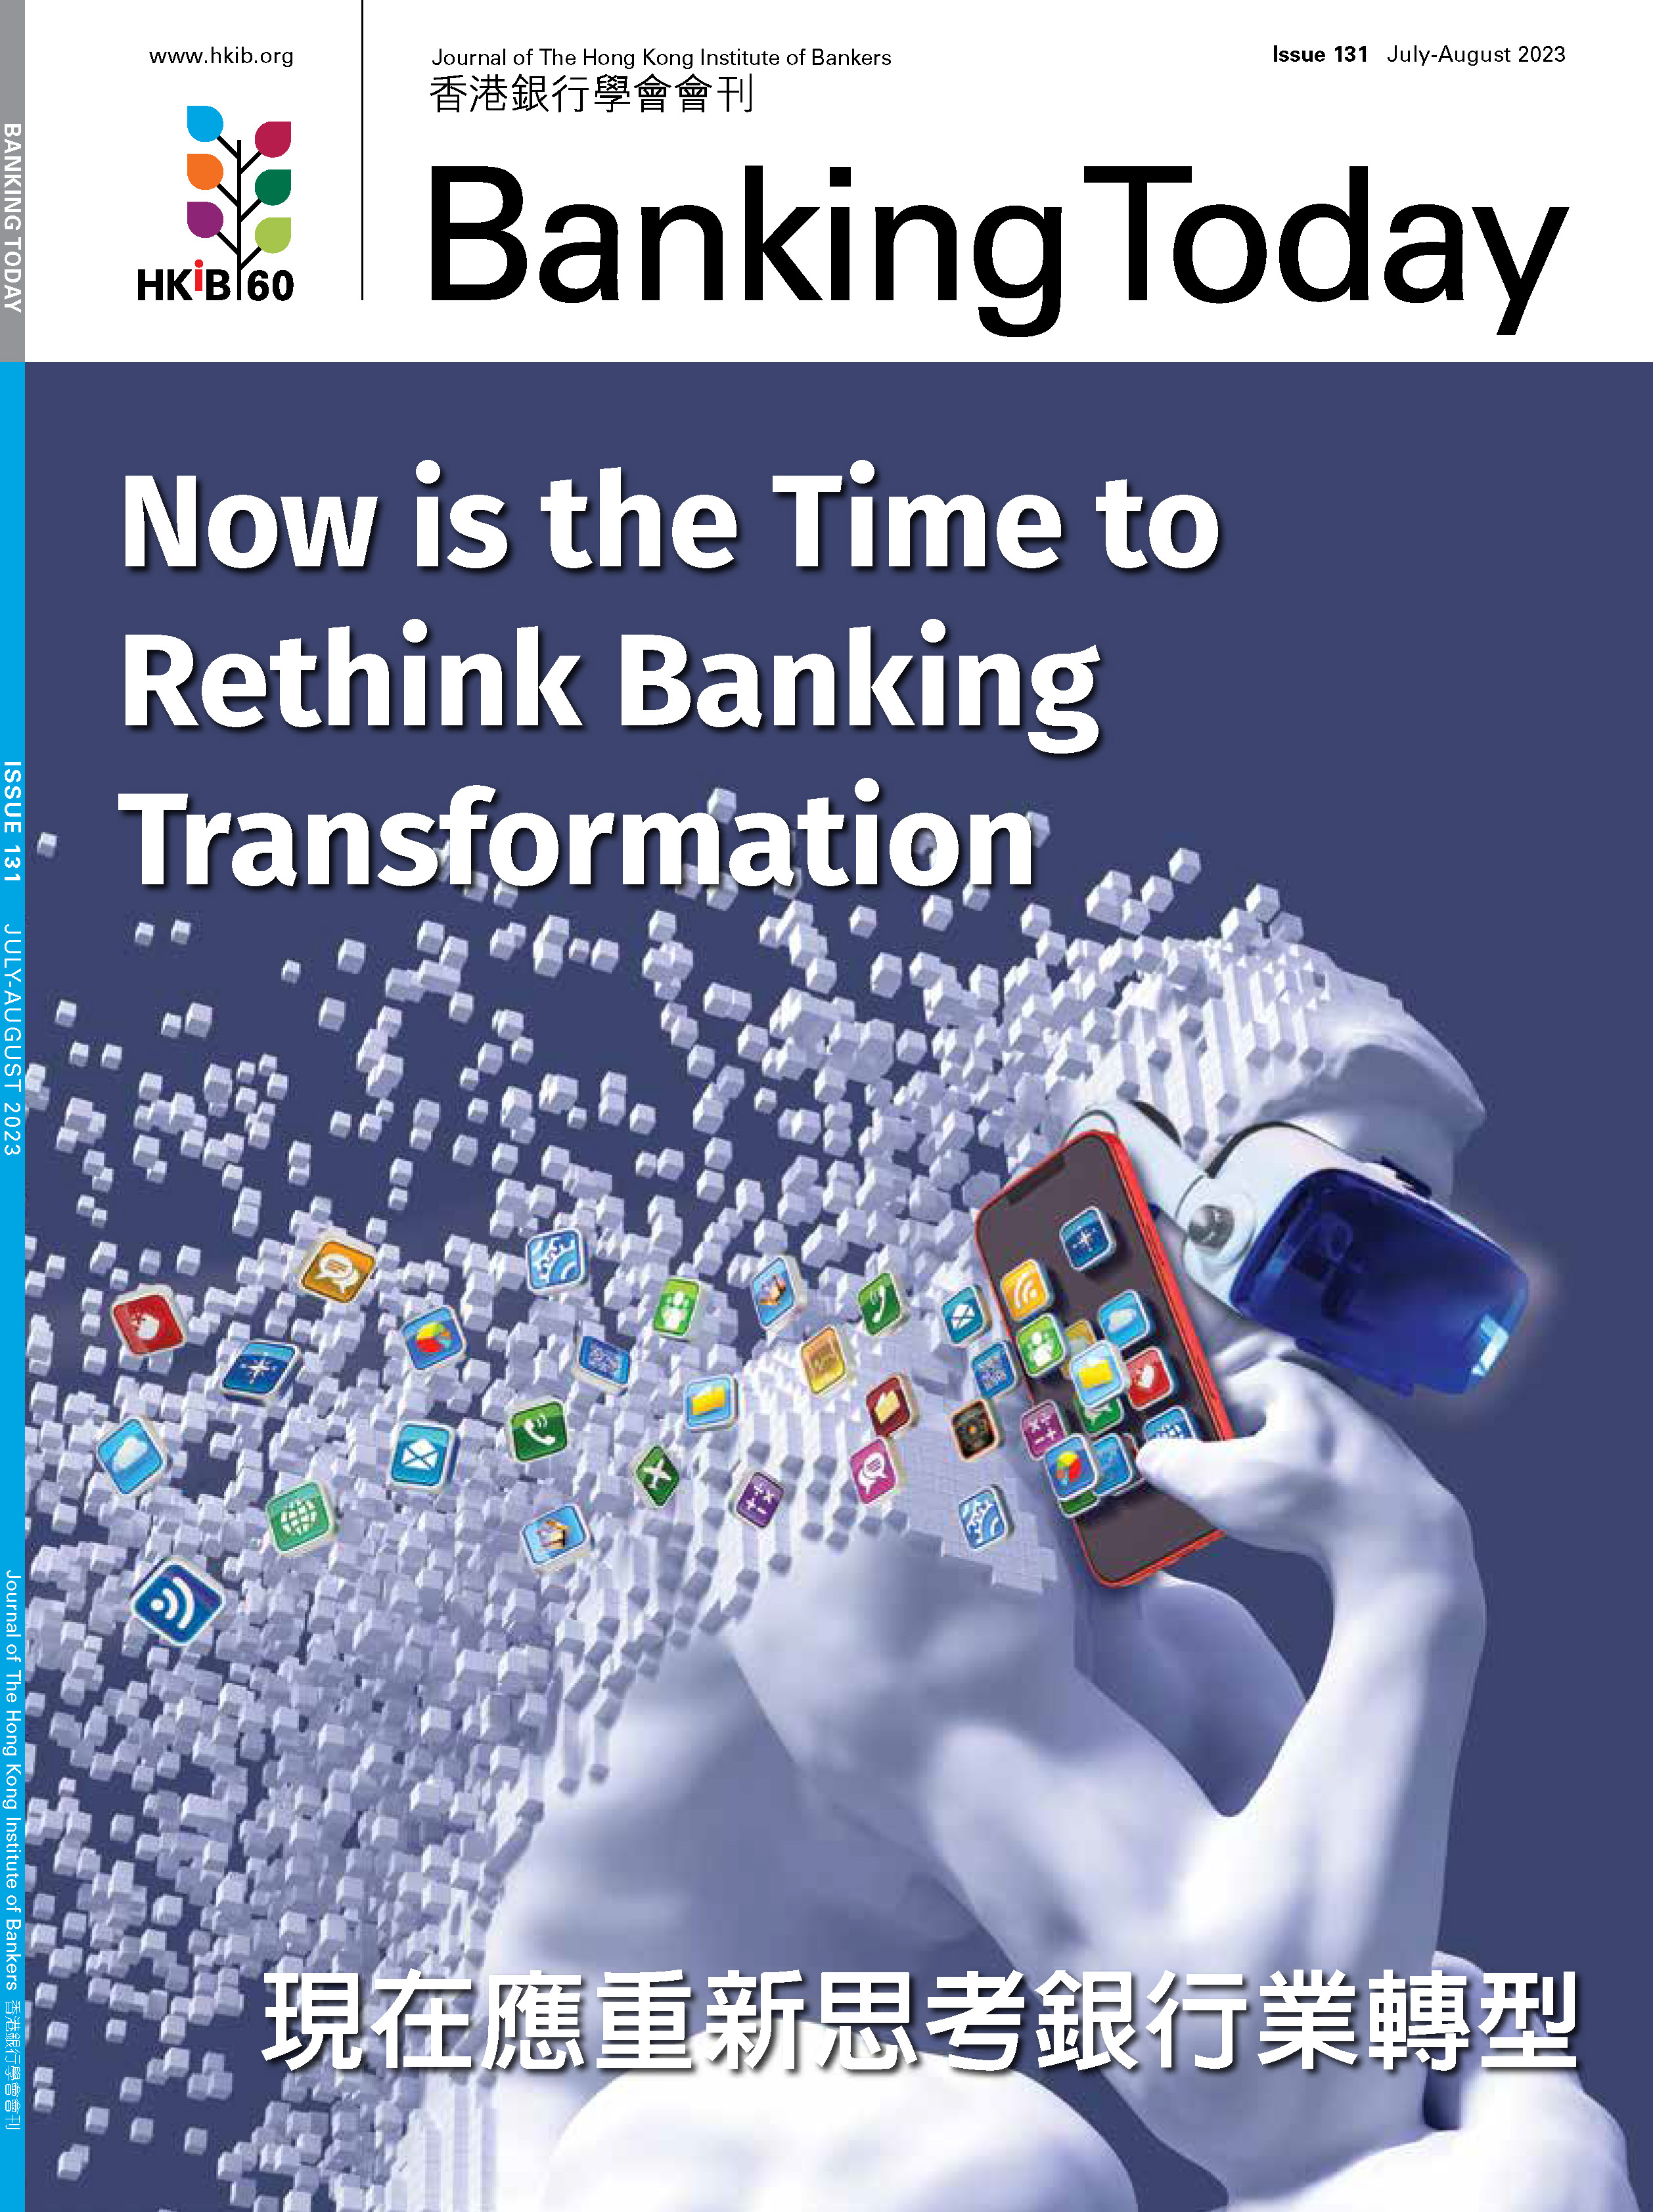 Now is the Time to Rethink Banking Transformation